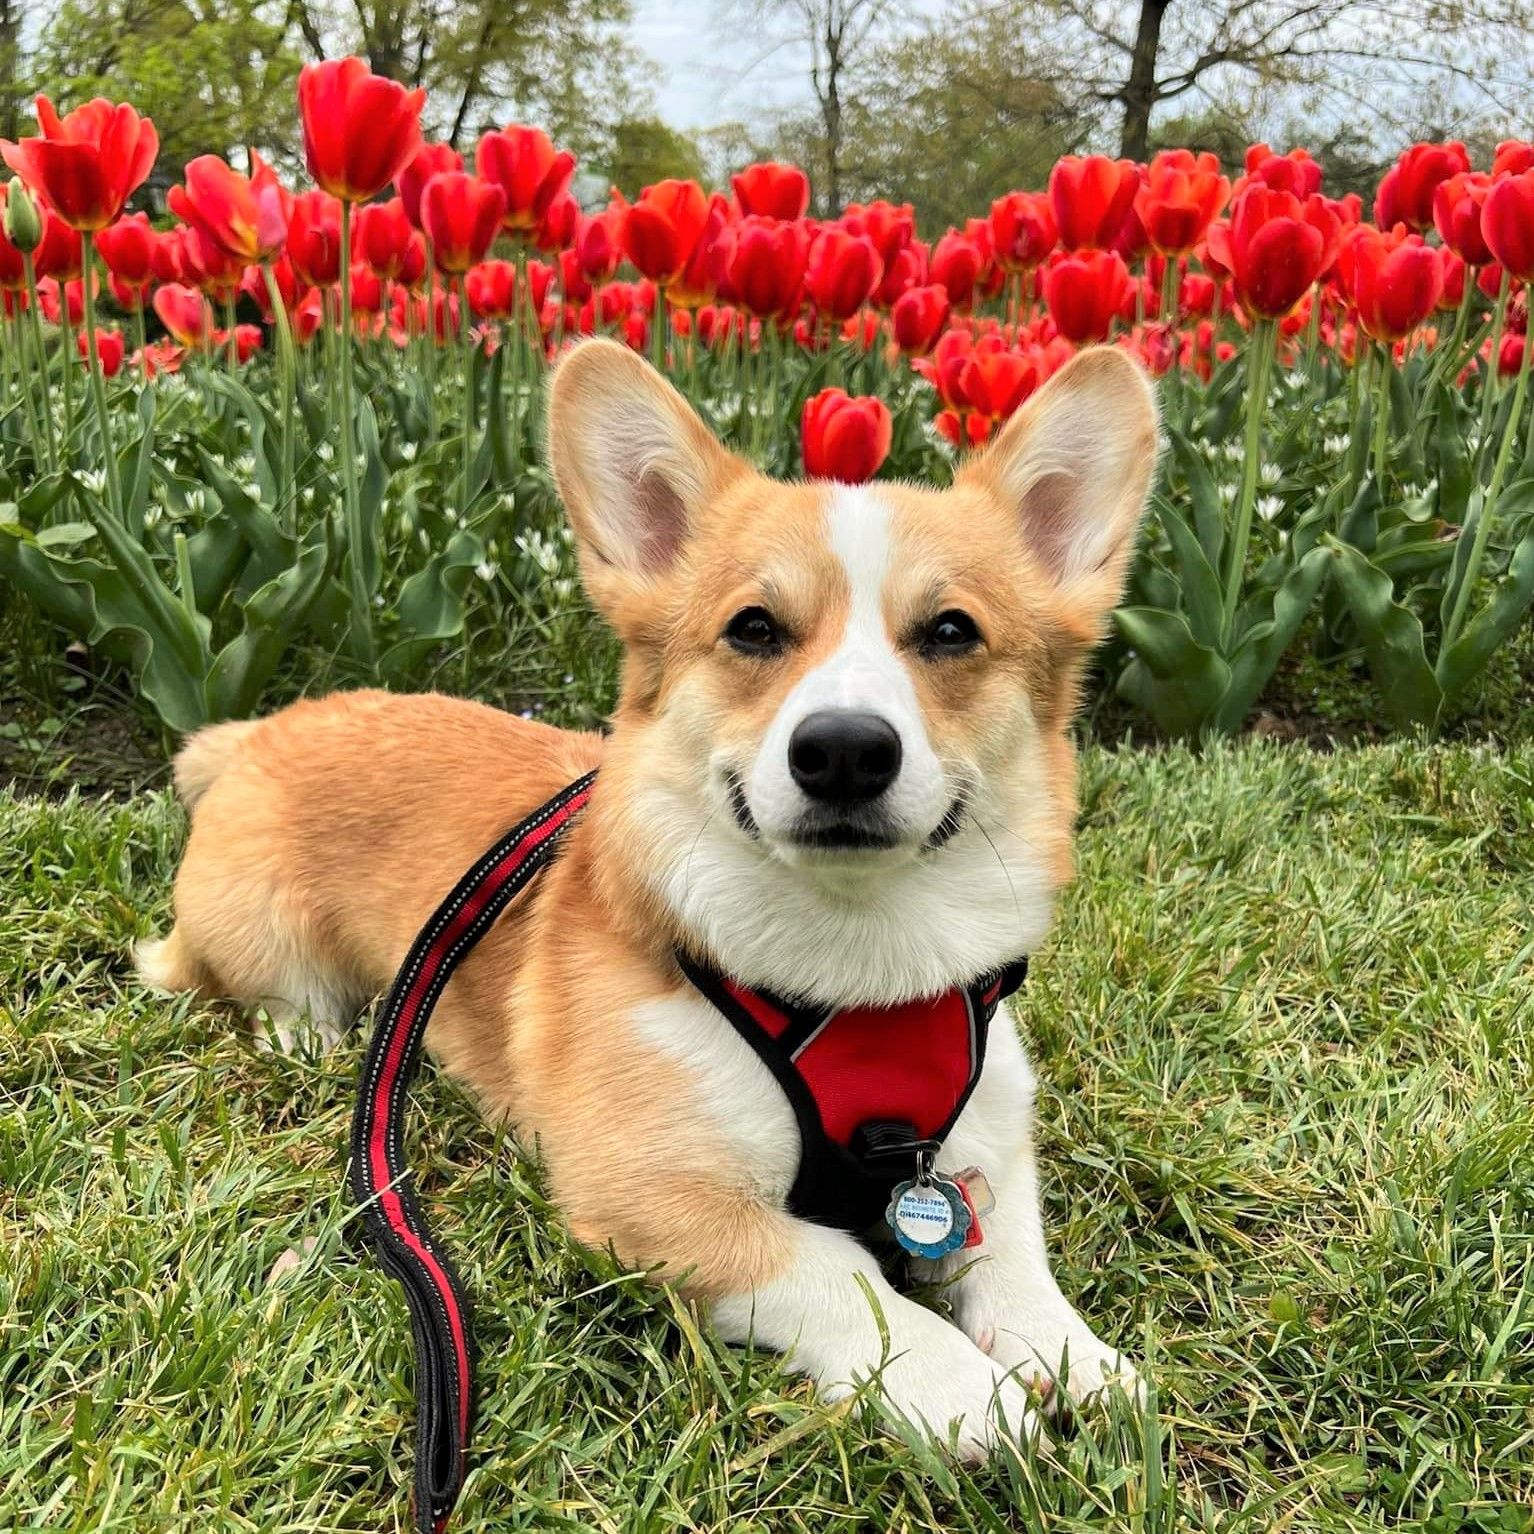 A photo of Hercules, a red and white Pembroke Welsh Corgi with a tail.